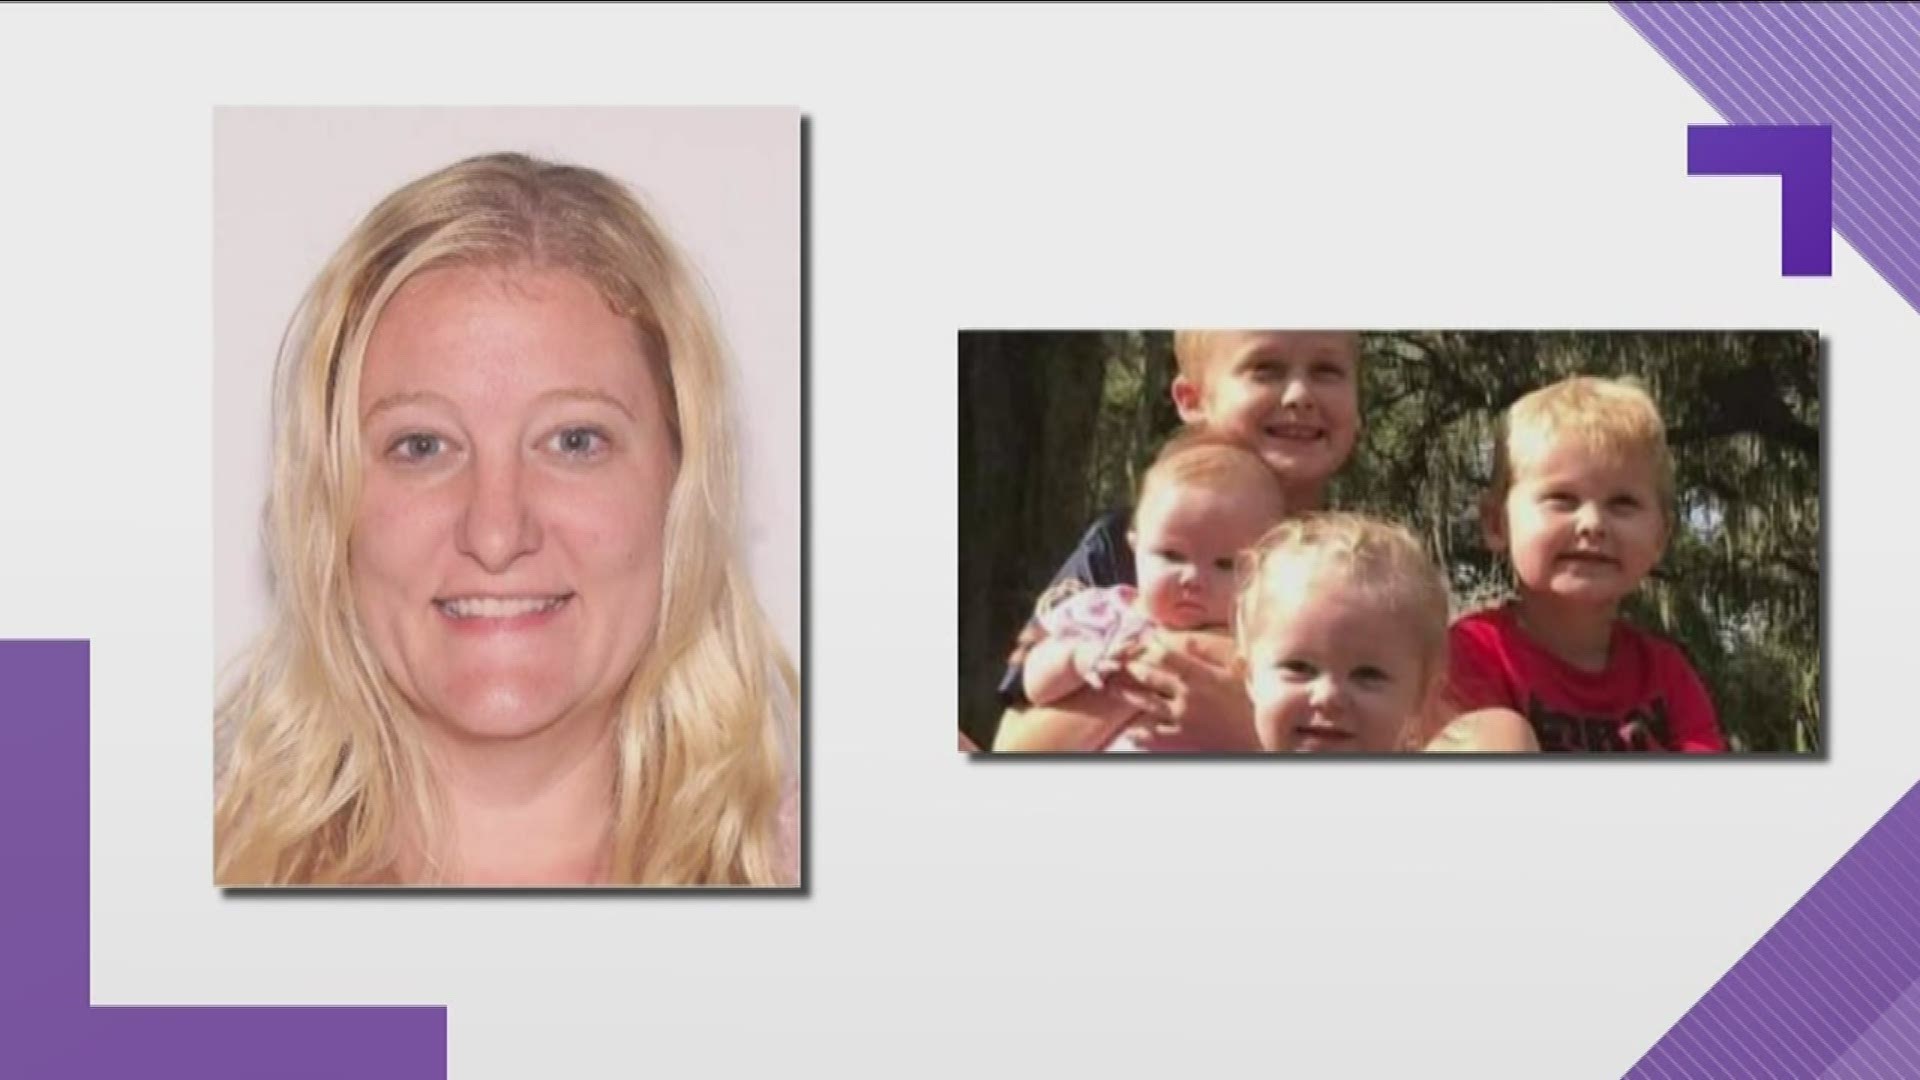 They hadn't been seen in several weeks. The mother's body was found in her husband's car.